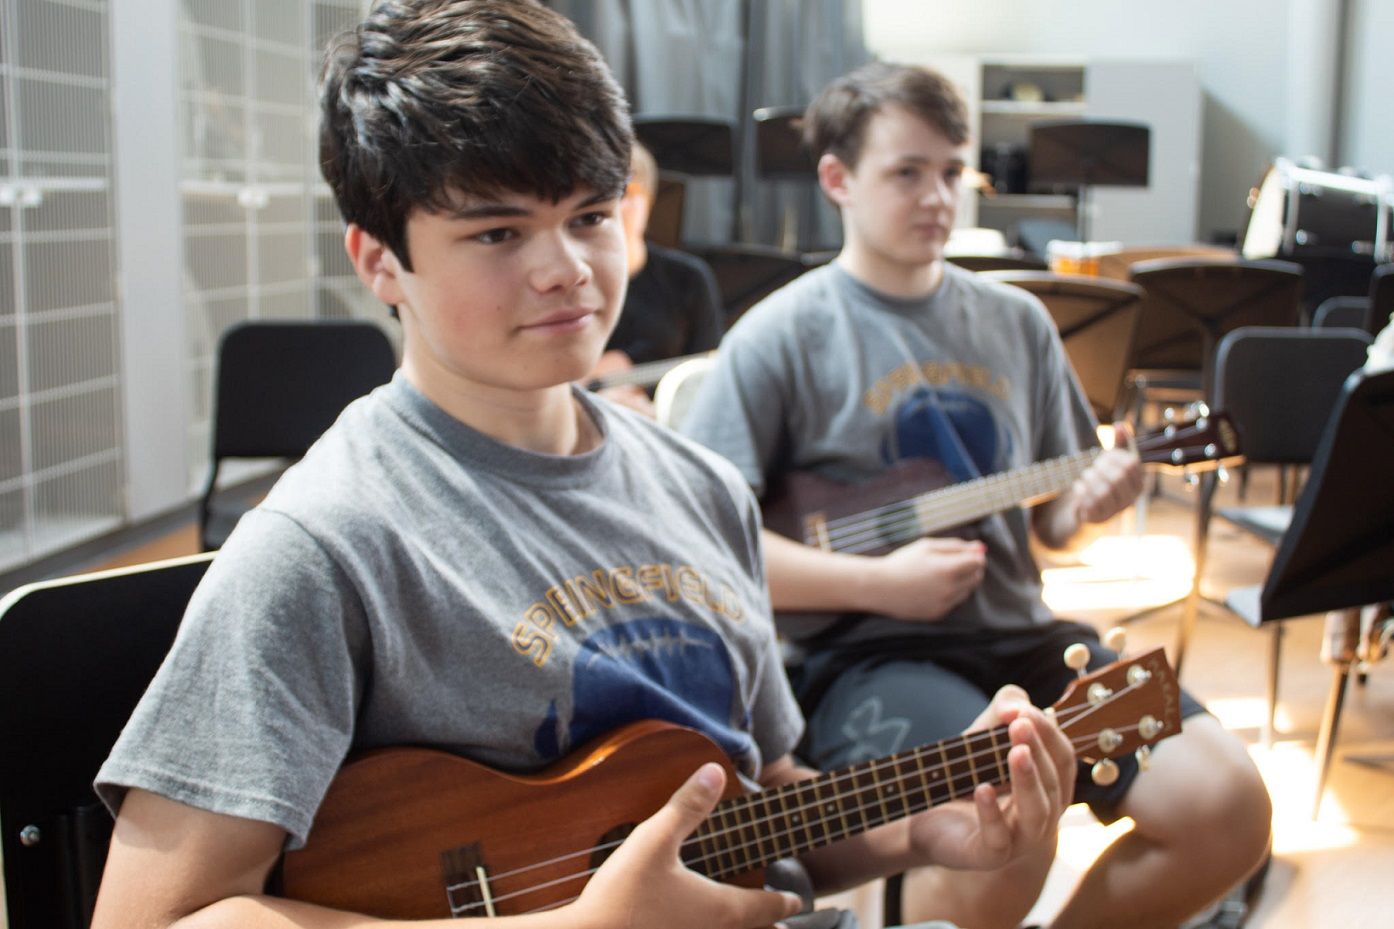 Springfield High School students playing the ukulele